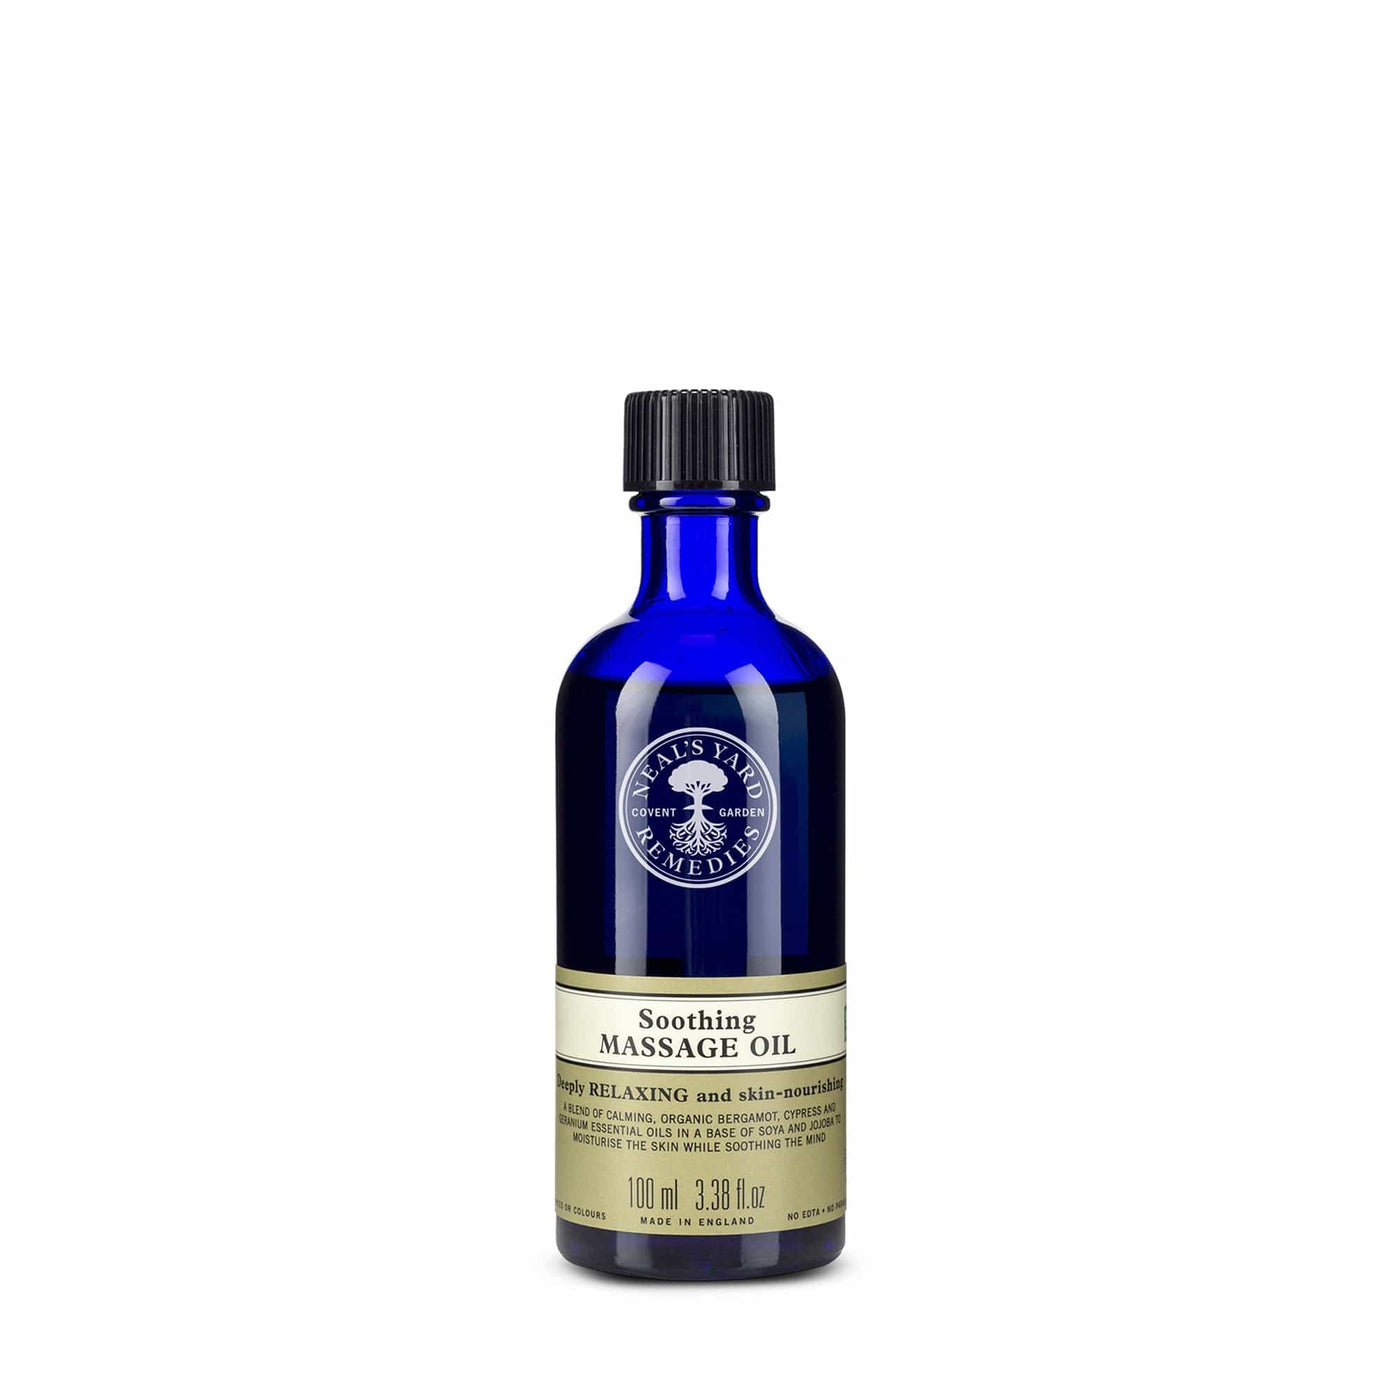 Neal's Yard Remedies Soothing Massage Oil 100ml